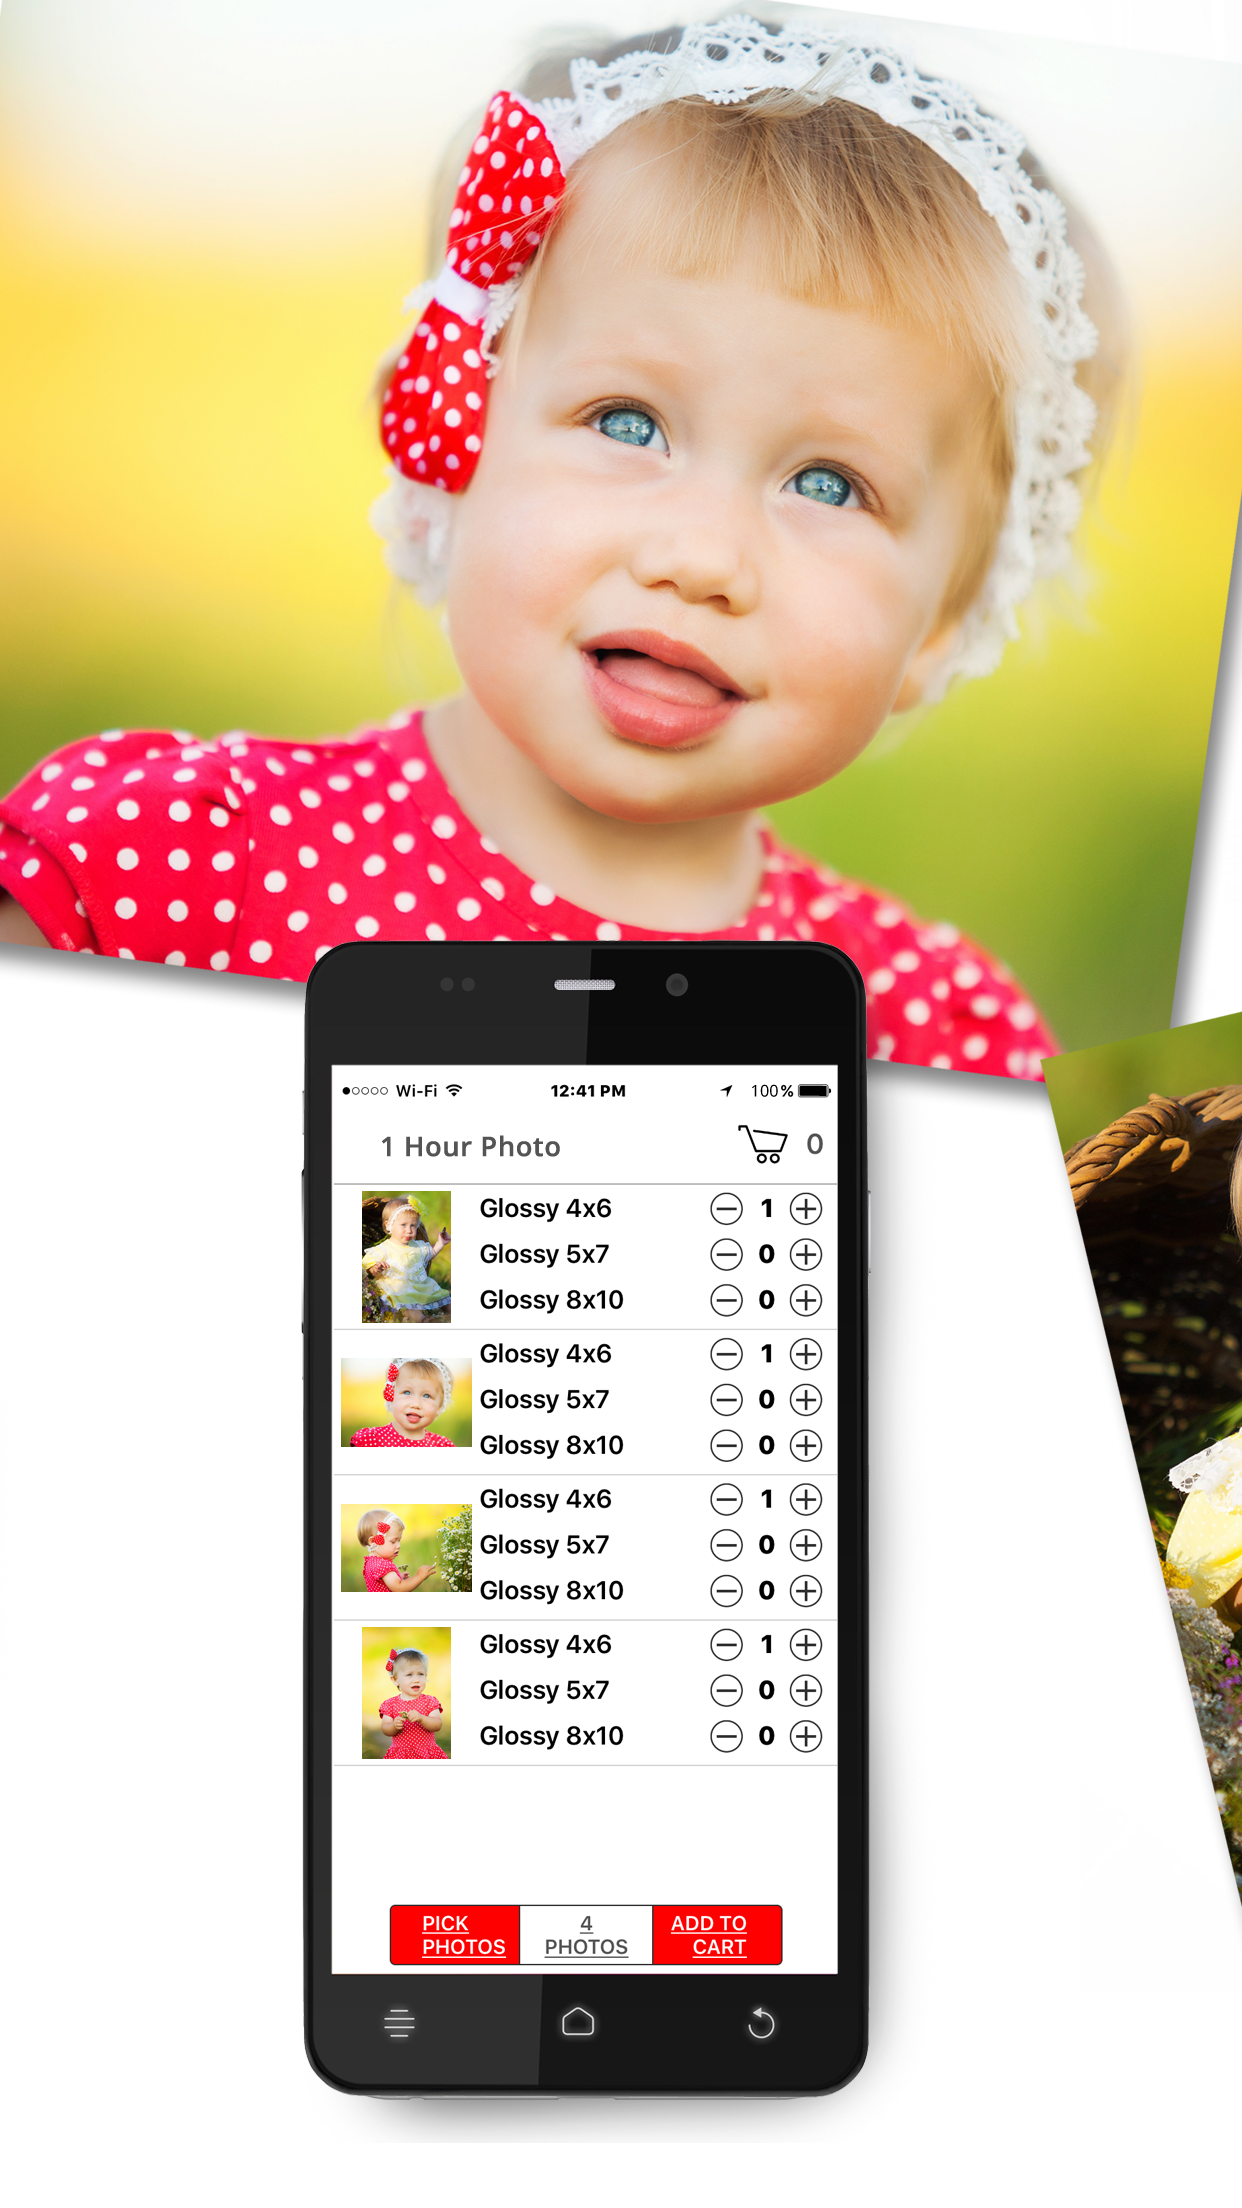 Android application Photo Bucket 1 Hour: Prints screenshort